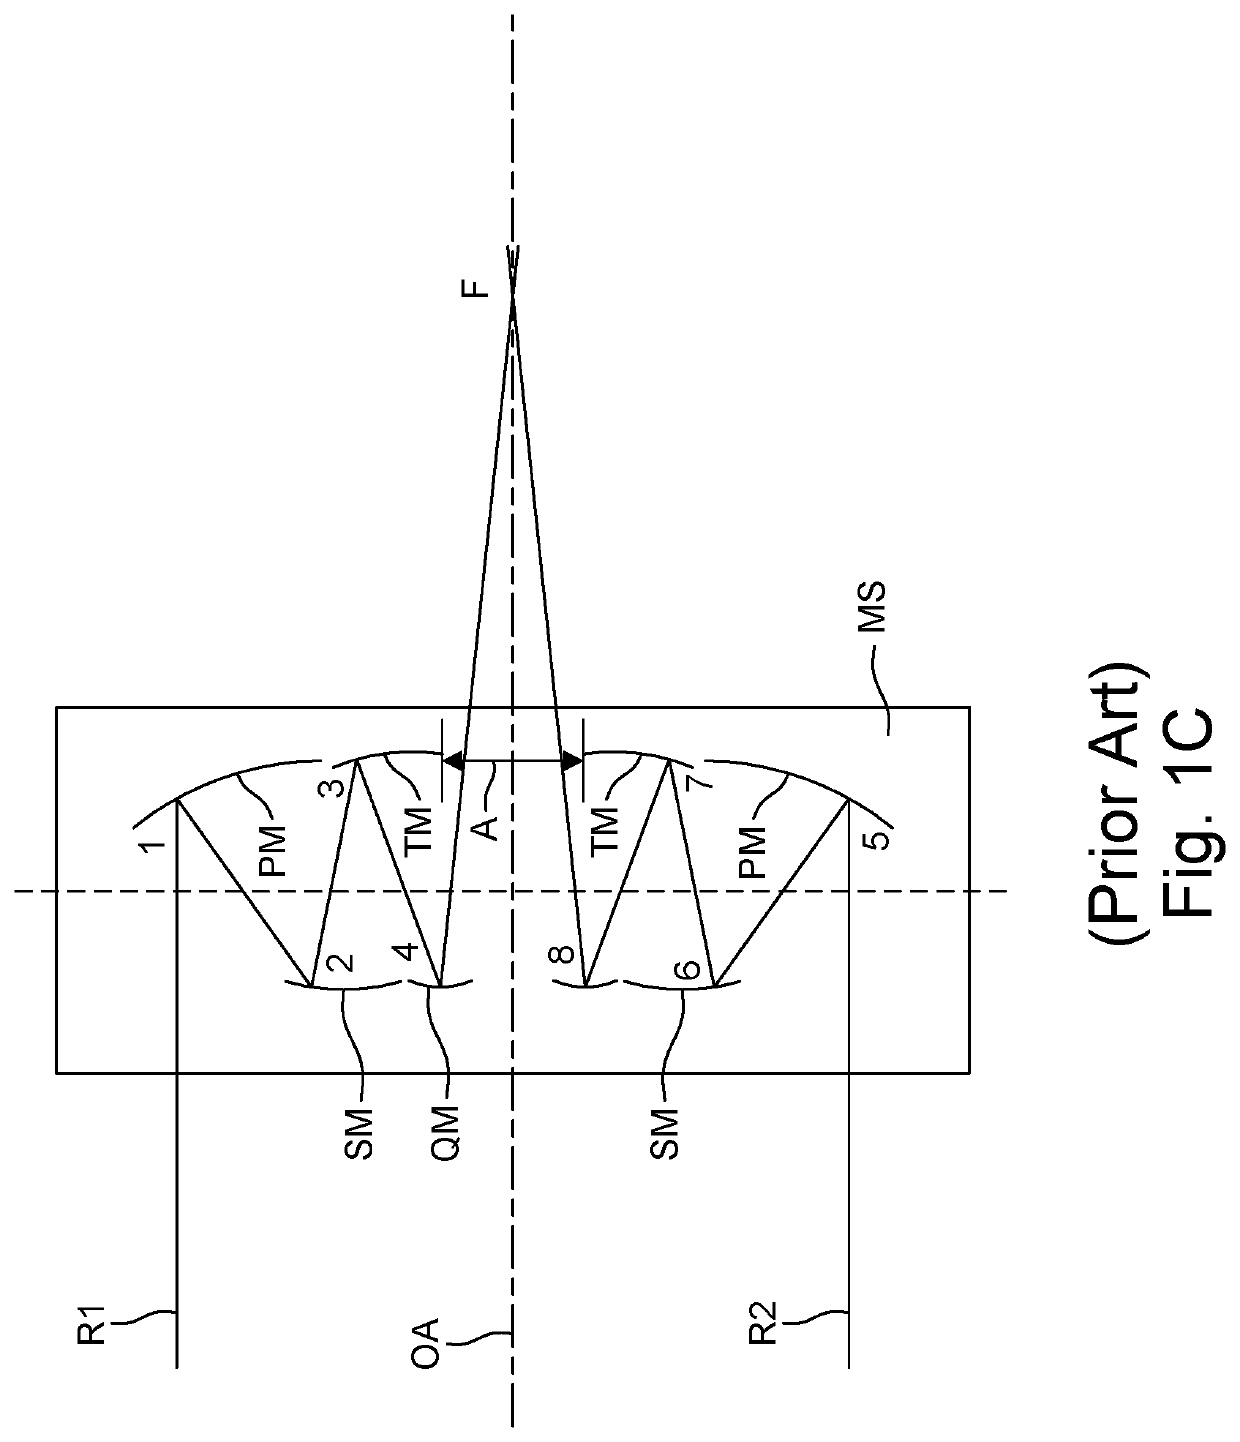 Multi-channel folded optical system